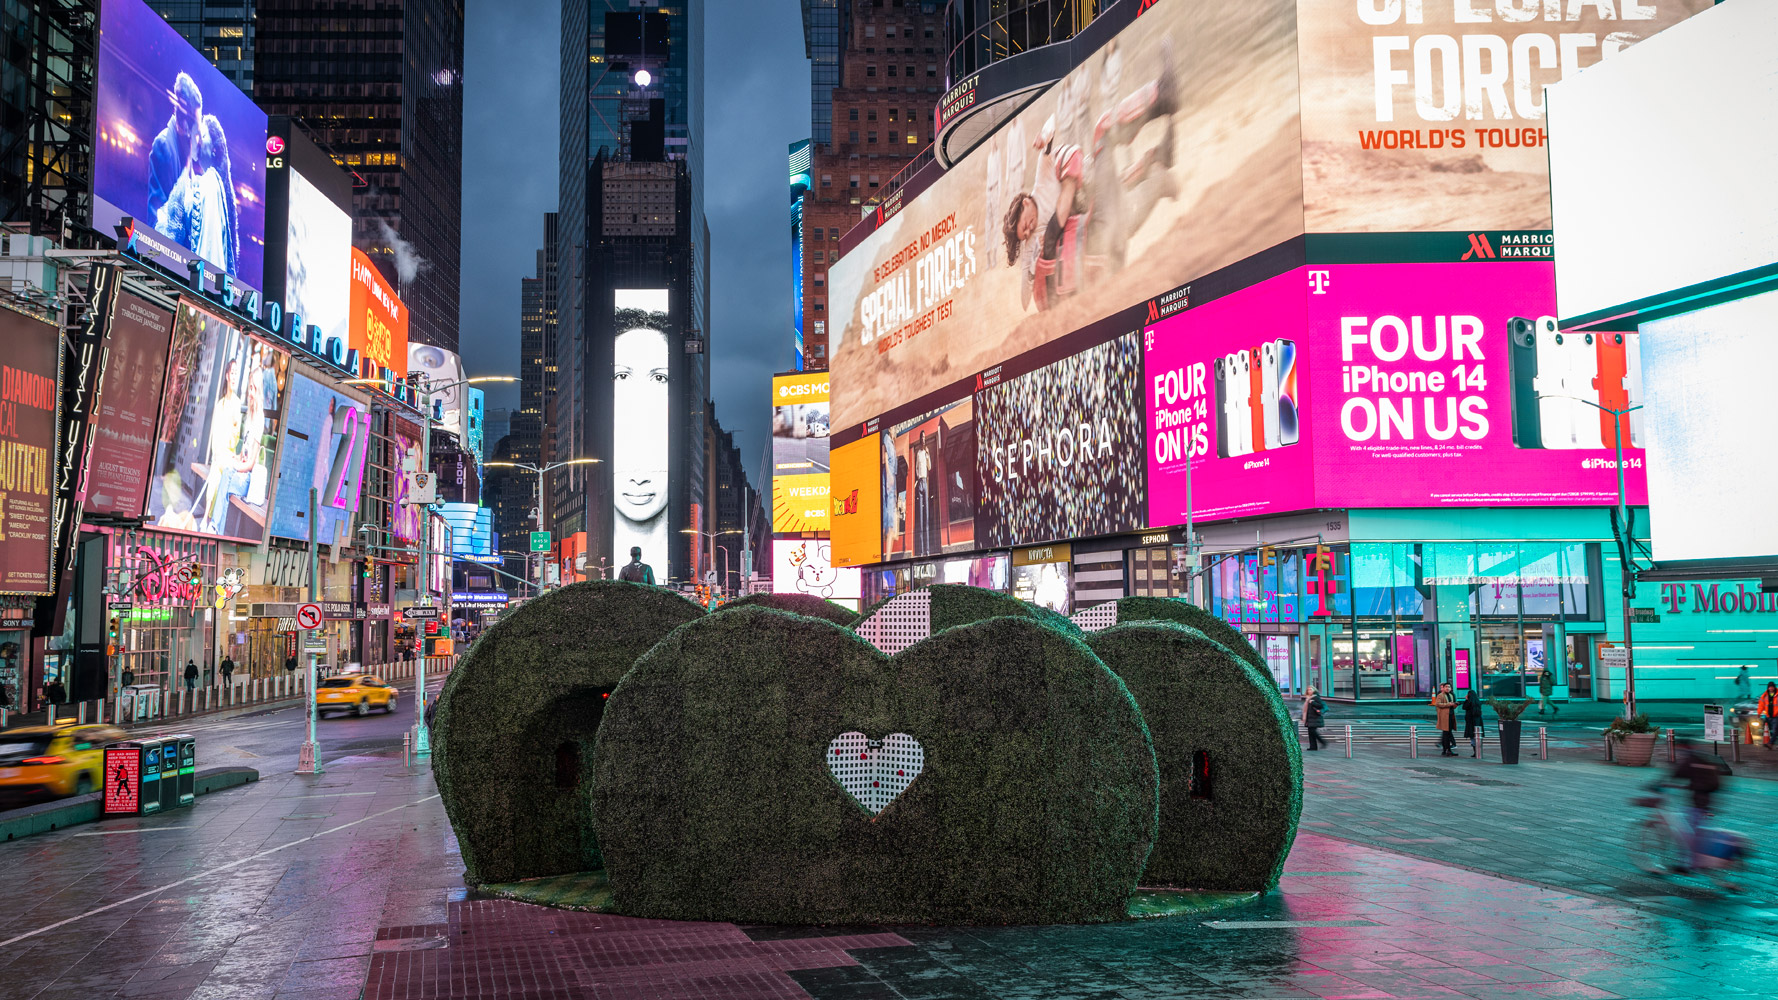 Almost Studio’s Heart-Shaped Topiary Mini-Maze Blooms in Times Square for Valentine's Day